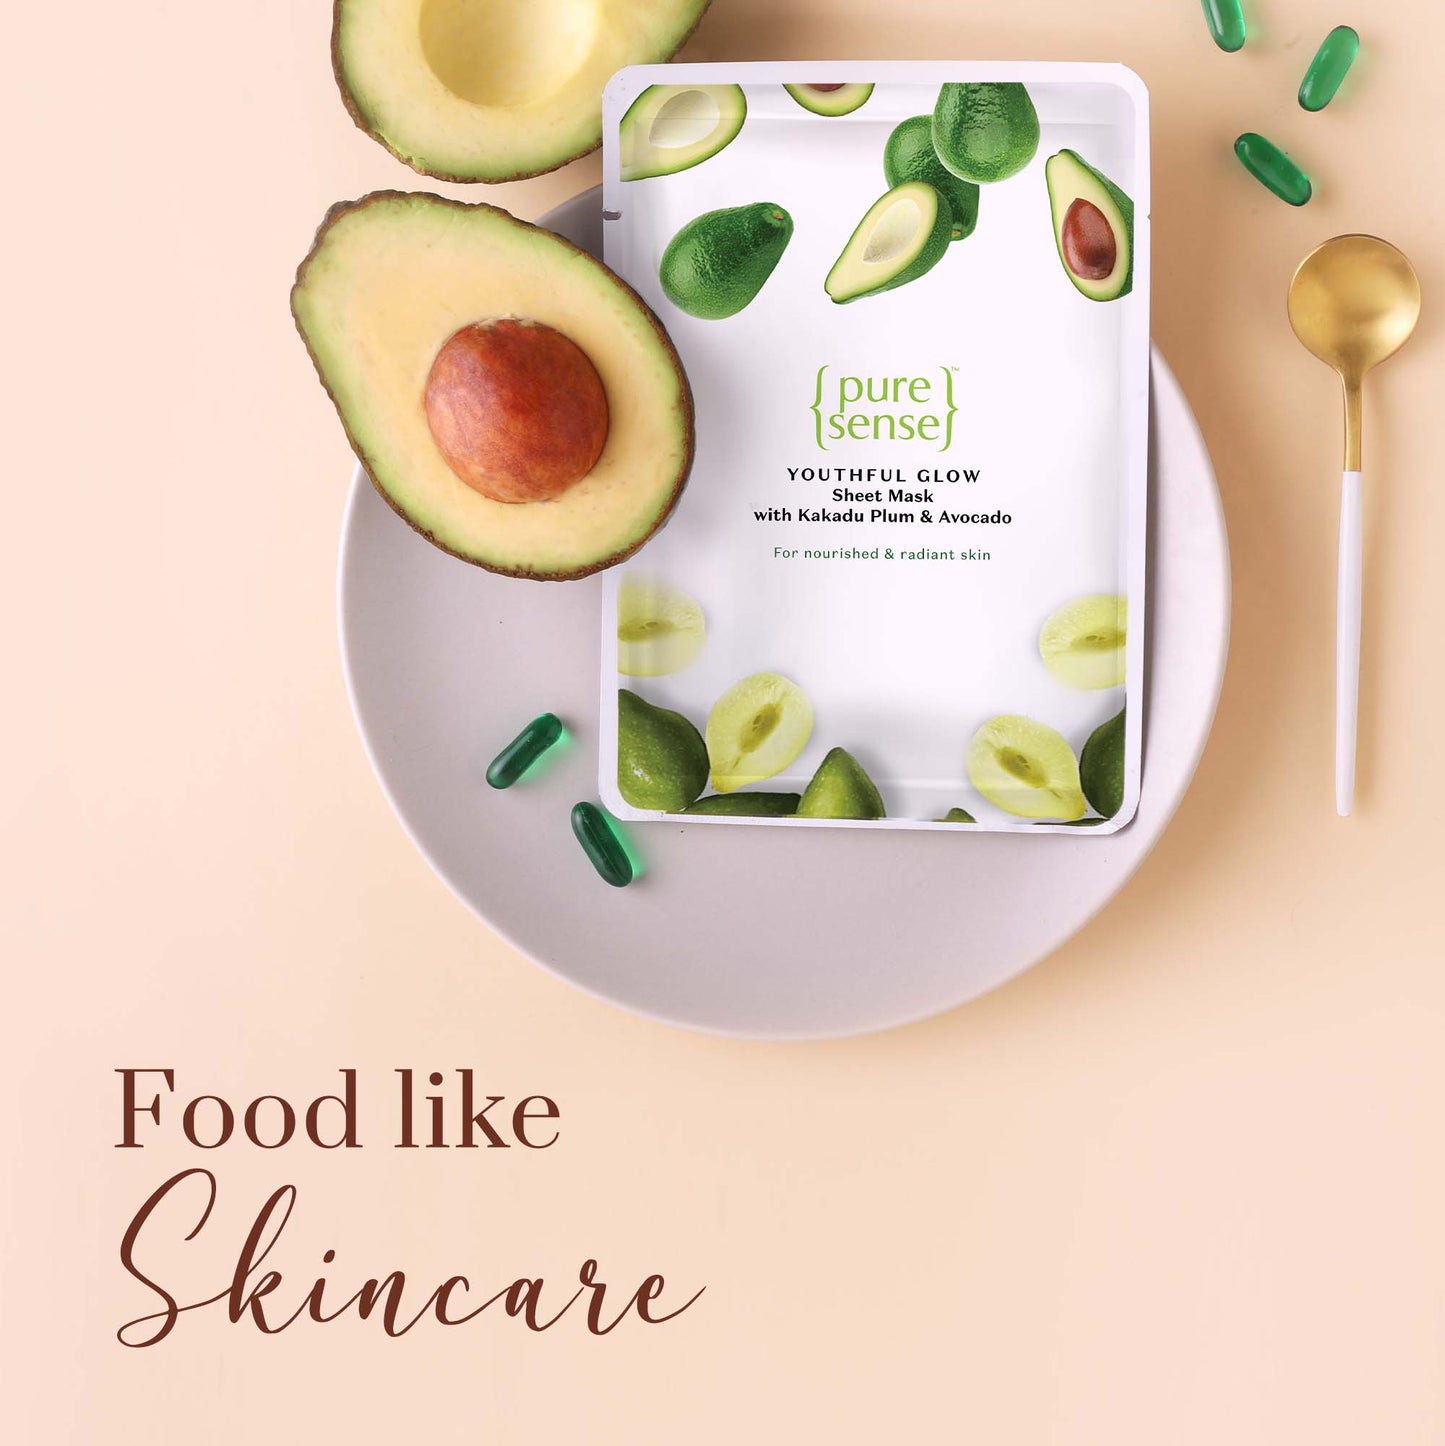 Anti-Ageing Sheet Mask with Kakadu Plum  Avocado    From the makers of Parachute Advansed  15ml